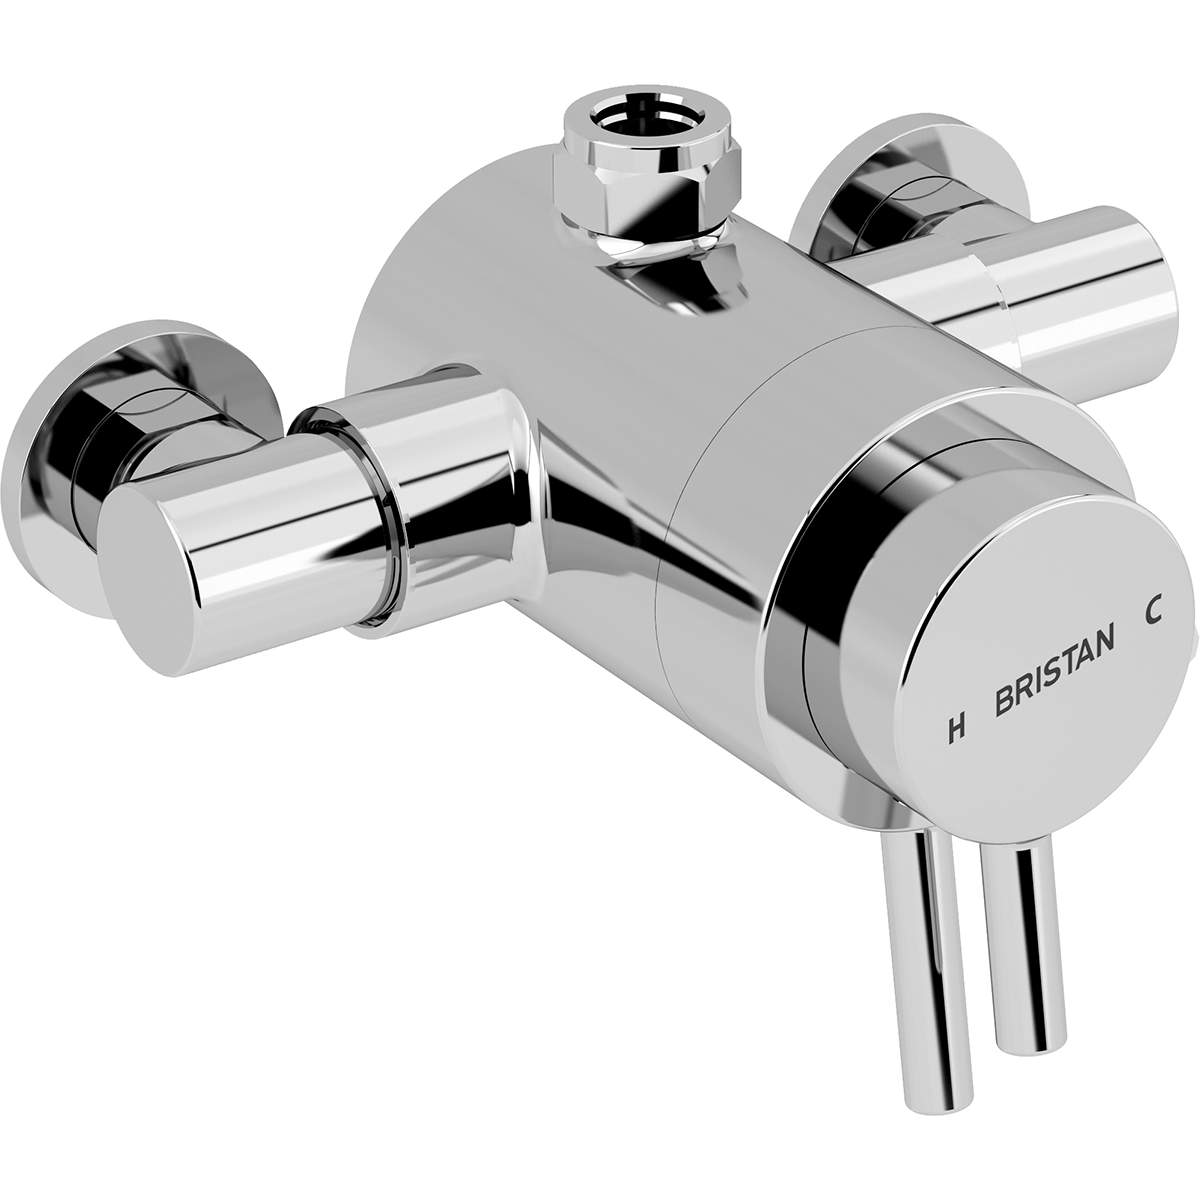 Bristan Prism Exposed Dual Control Shower Valve with Top Outlet (PM2 CSHXTVO C)